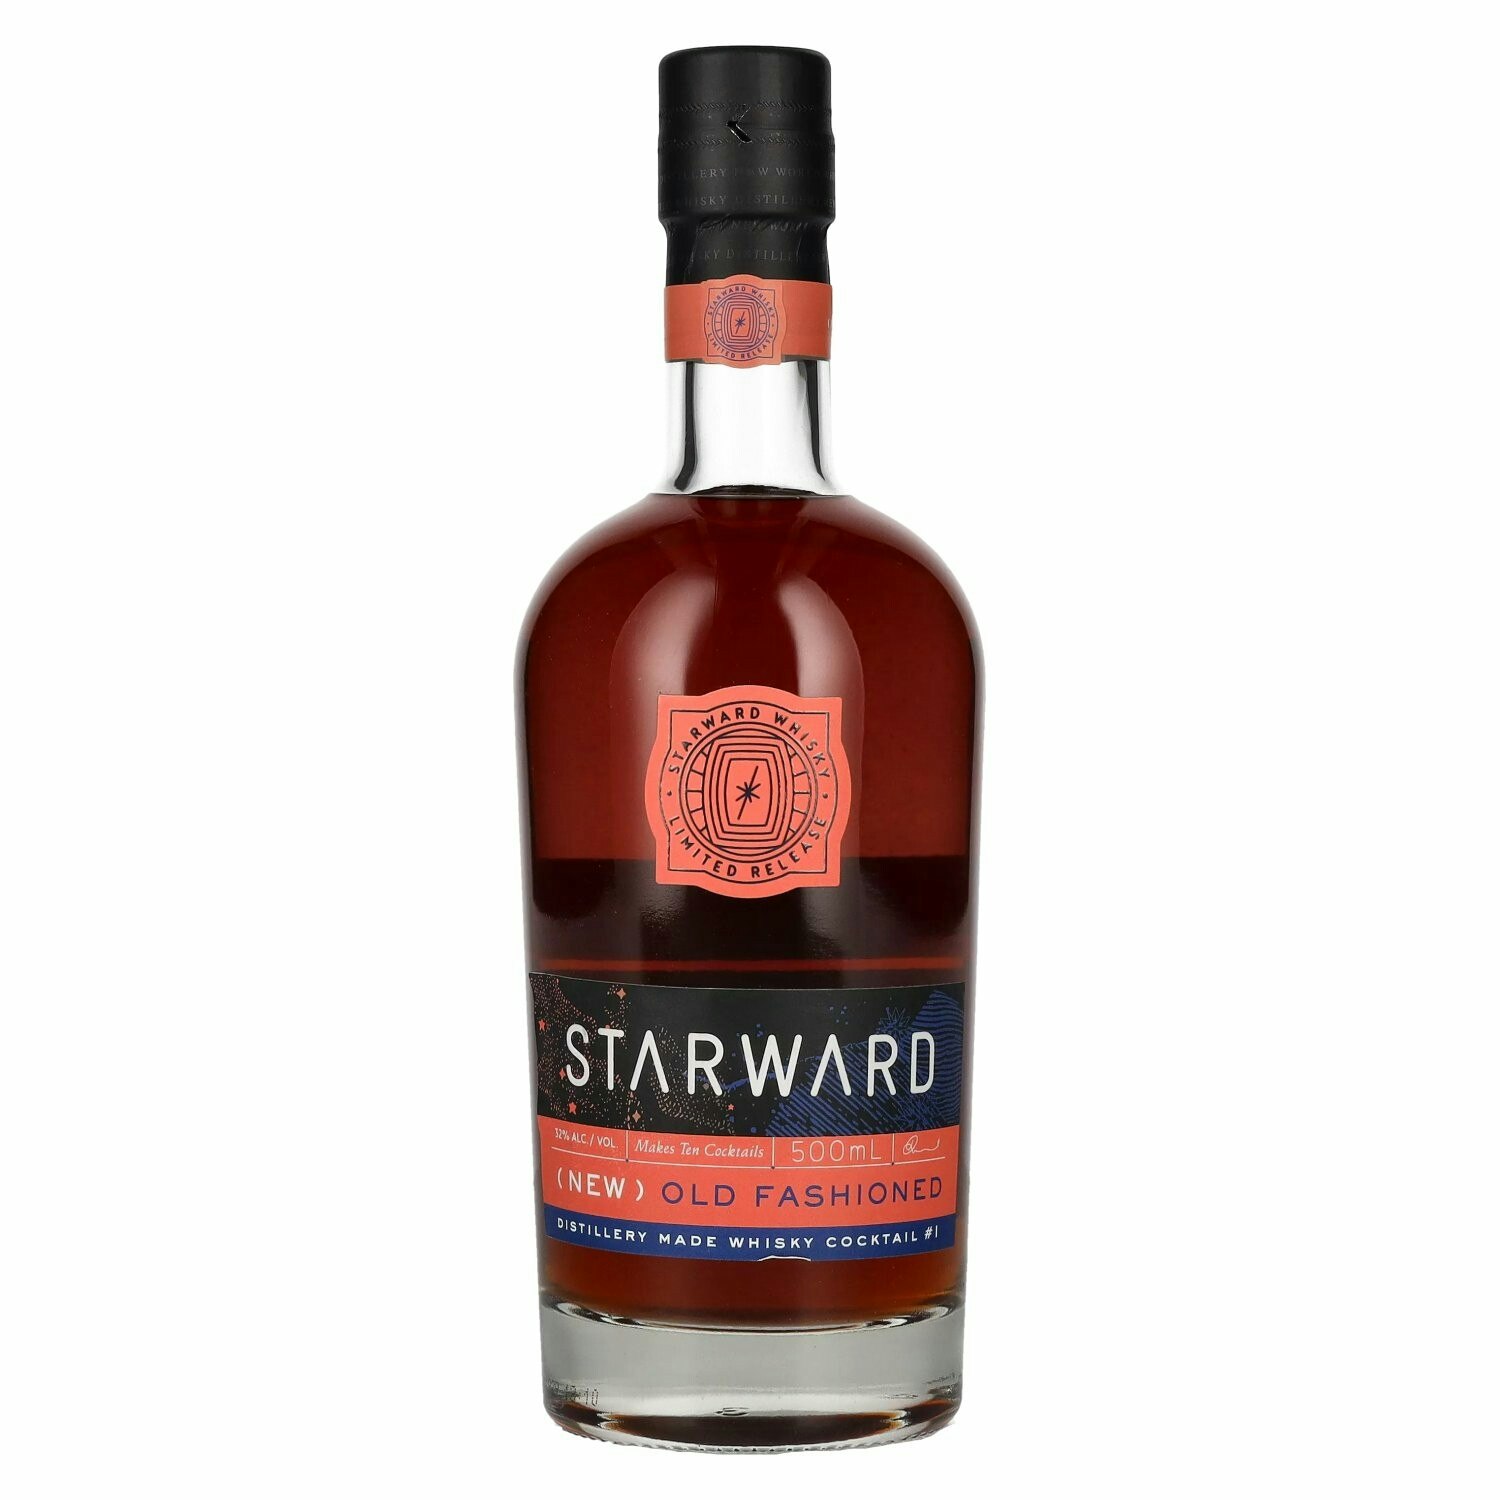 Starward (NEW) OLD FASHIONED Whisky Cocktail #1 32% Vol. 0,5l